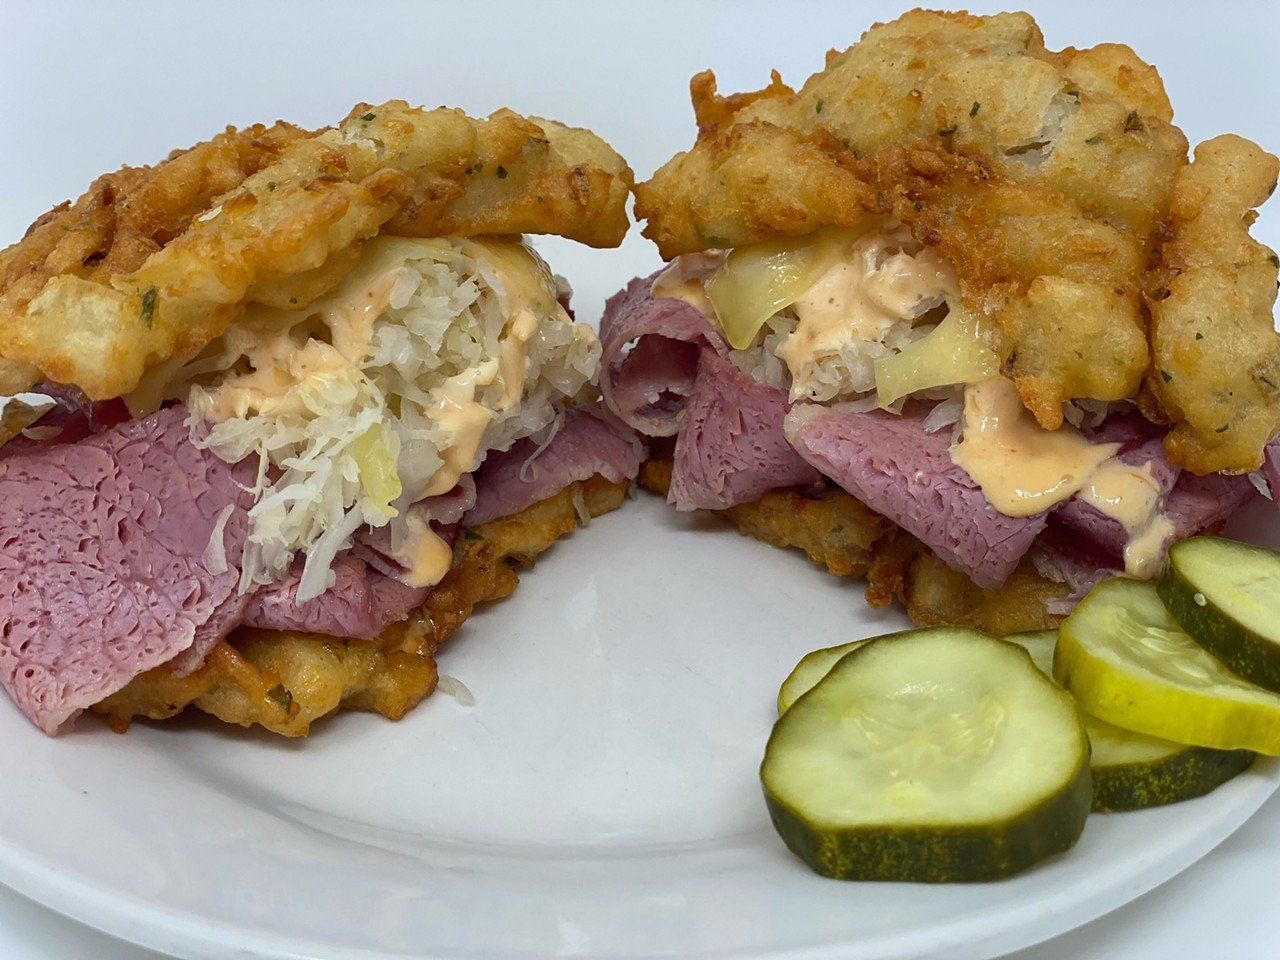 Izzy’s
Multiple locations, including 800 Elm St., Downtown; 5098 Glencrossing Way, Westwood; and 4766 Red Bank Expy., Madisonville
If you’re on the hunt for a good Reuben, Izzy’s claims to have the world’s best. Izzy’s famous corned beef is piled high on rye bread and topped with melted swiss cheese, sauerkraut and secret dressing. The menu also has a variety of other sandwiches, including the now-permanent Codfather fish sandwich. You also won’t want to miss out on the award-winning potato pancakes.